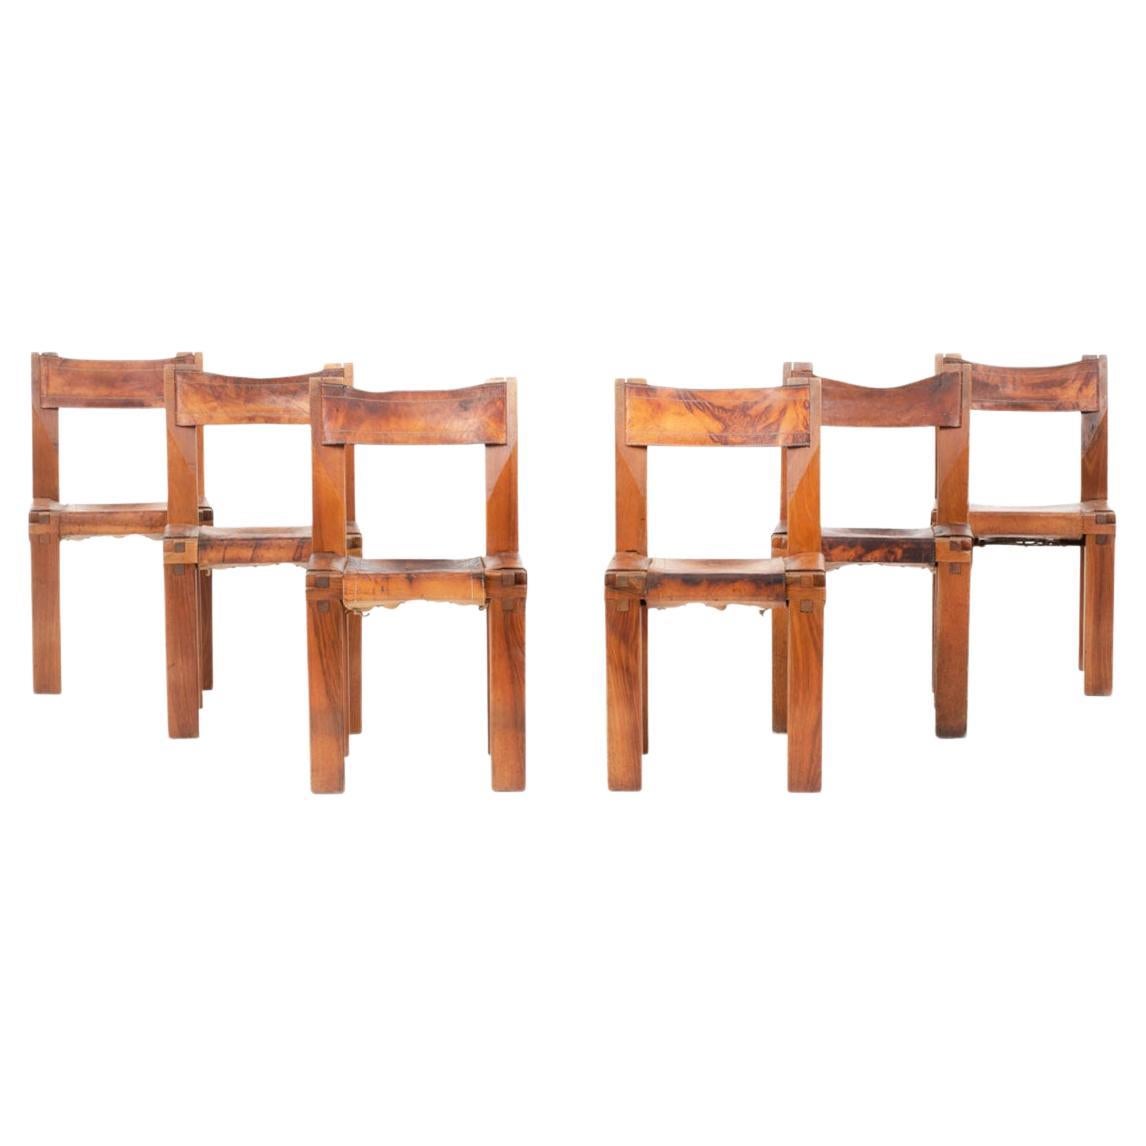 Set of 6 S11 Chairs by Pierre Chapo, 1960